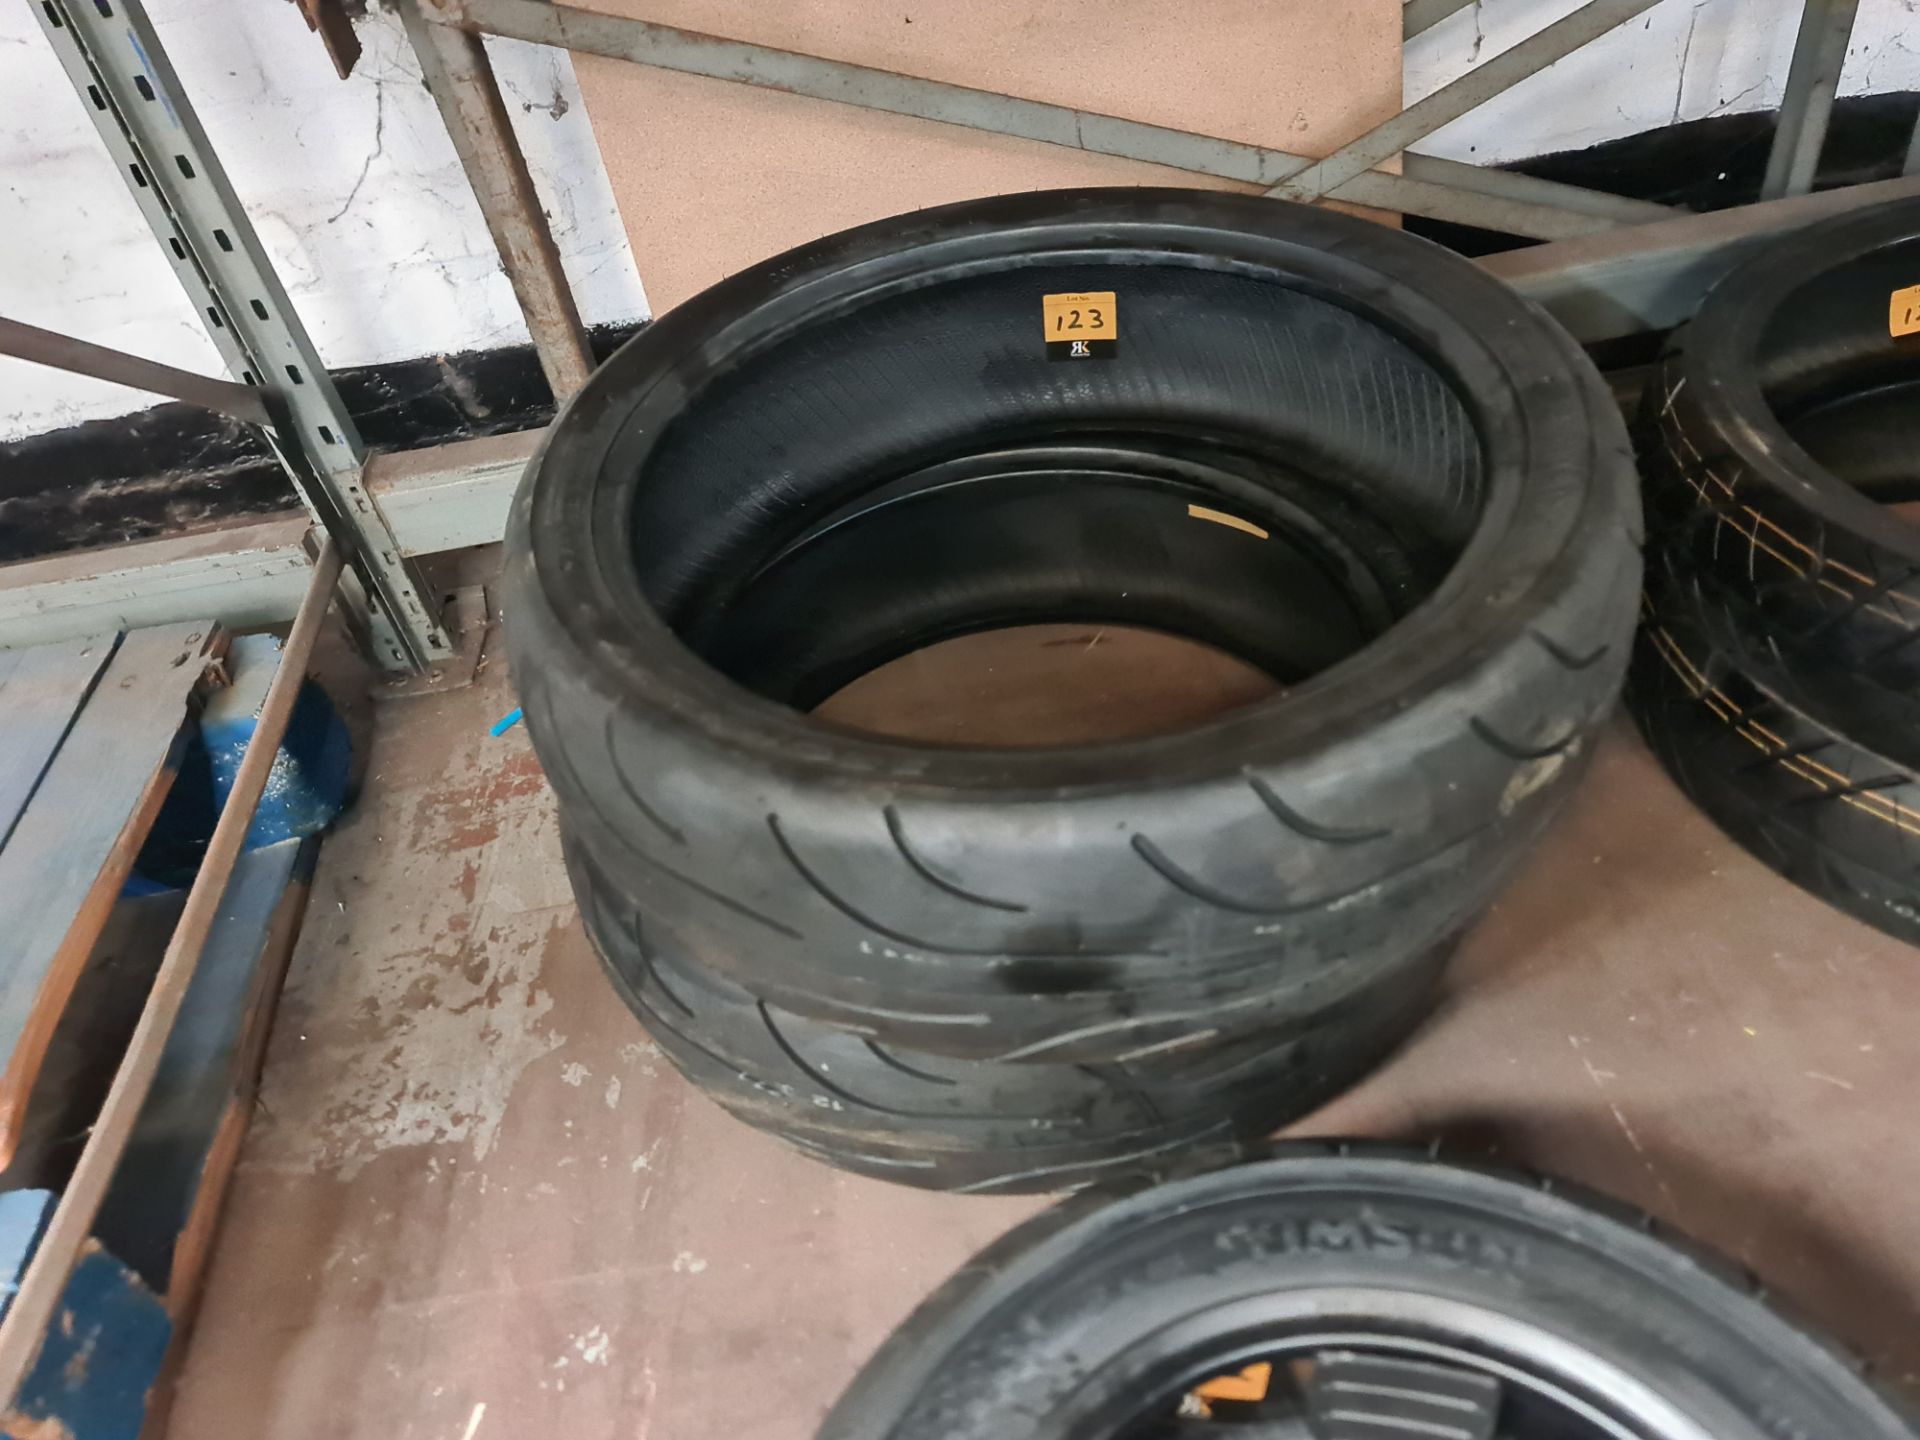 Pair of tyres - size 180/55-17